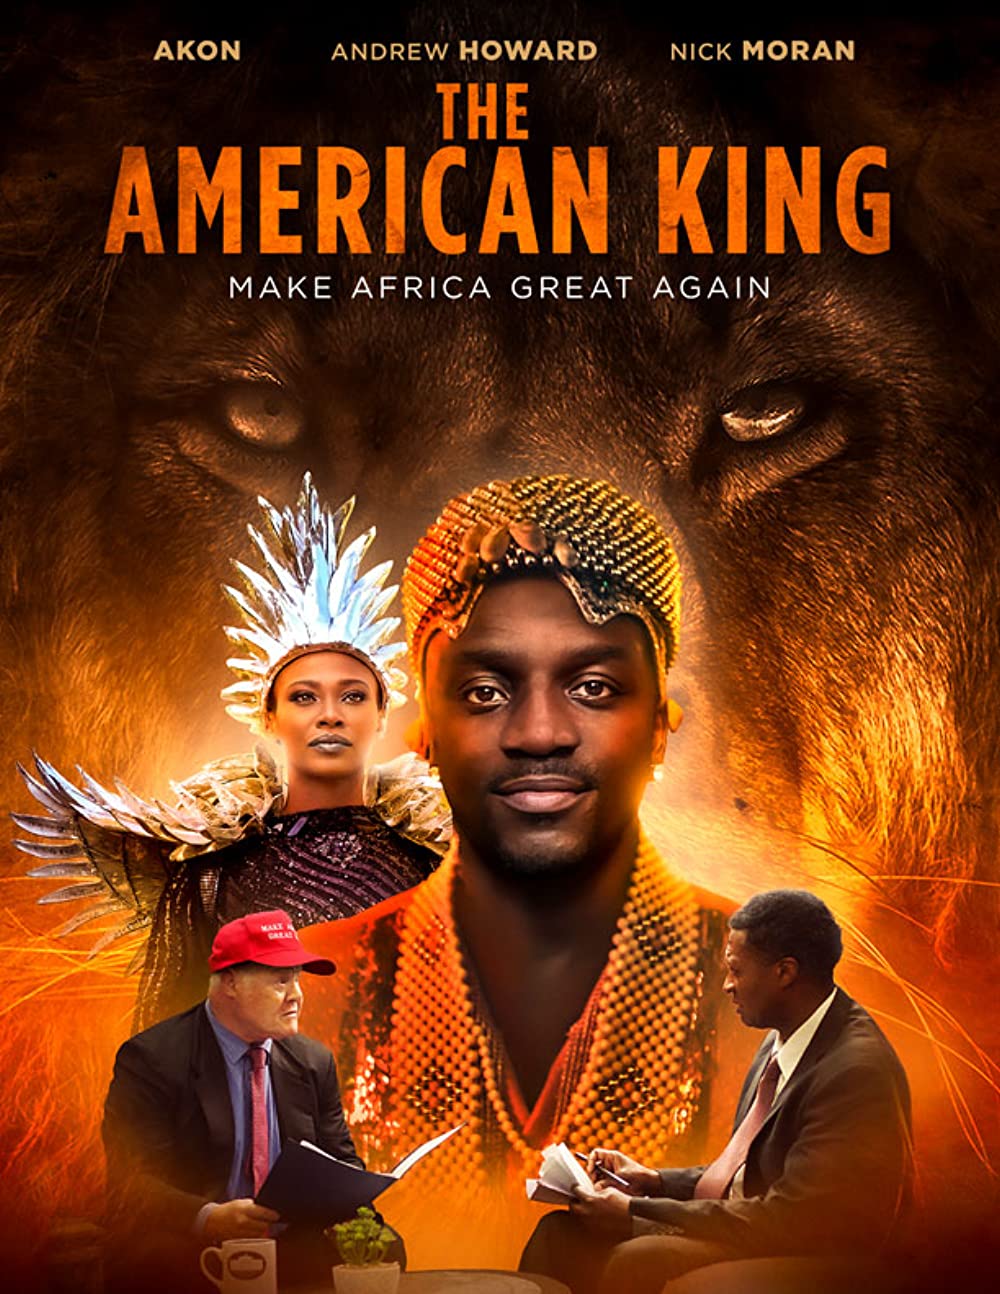 Akon Starrer "The American King" In Theaters & VOD In Late January